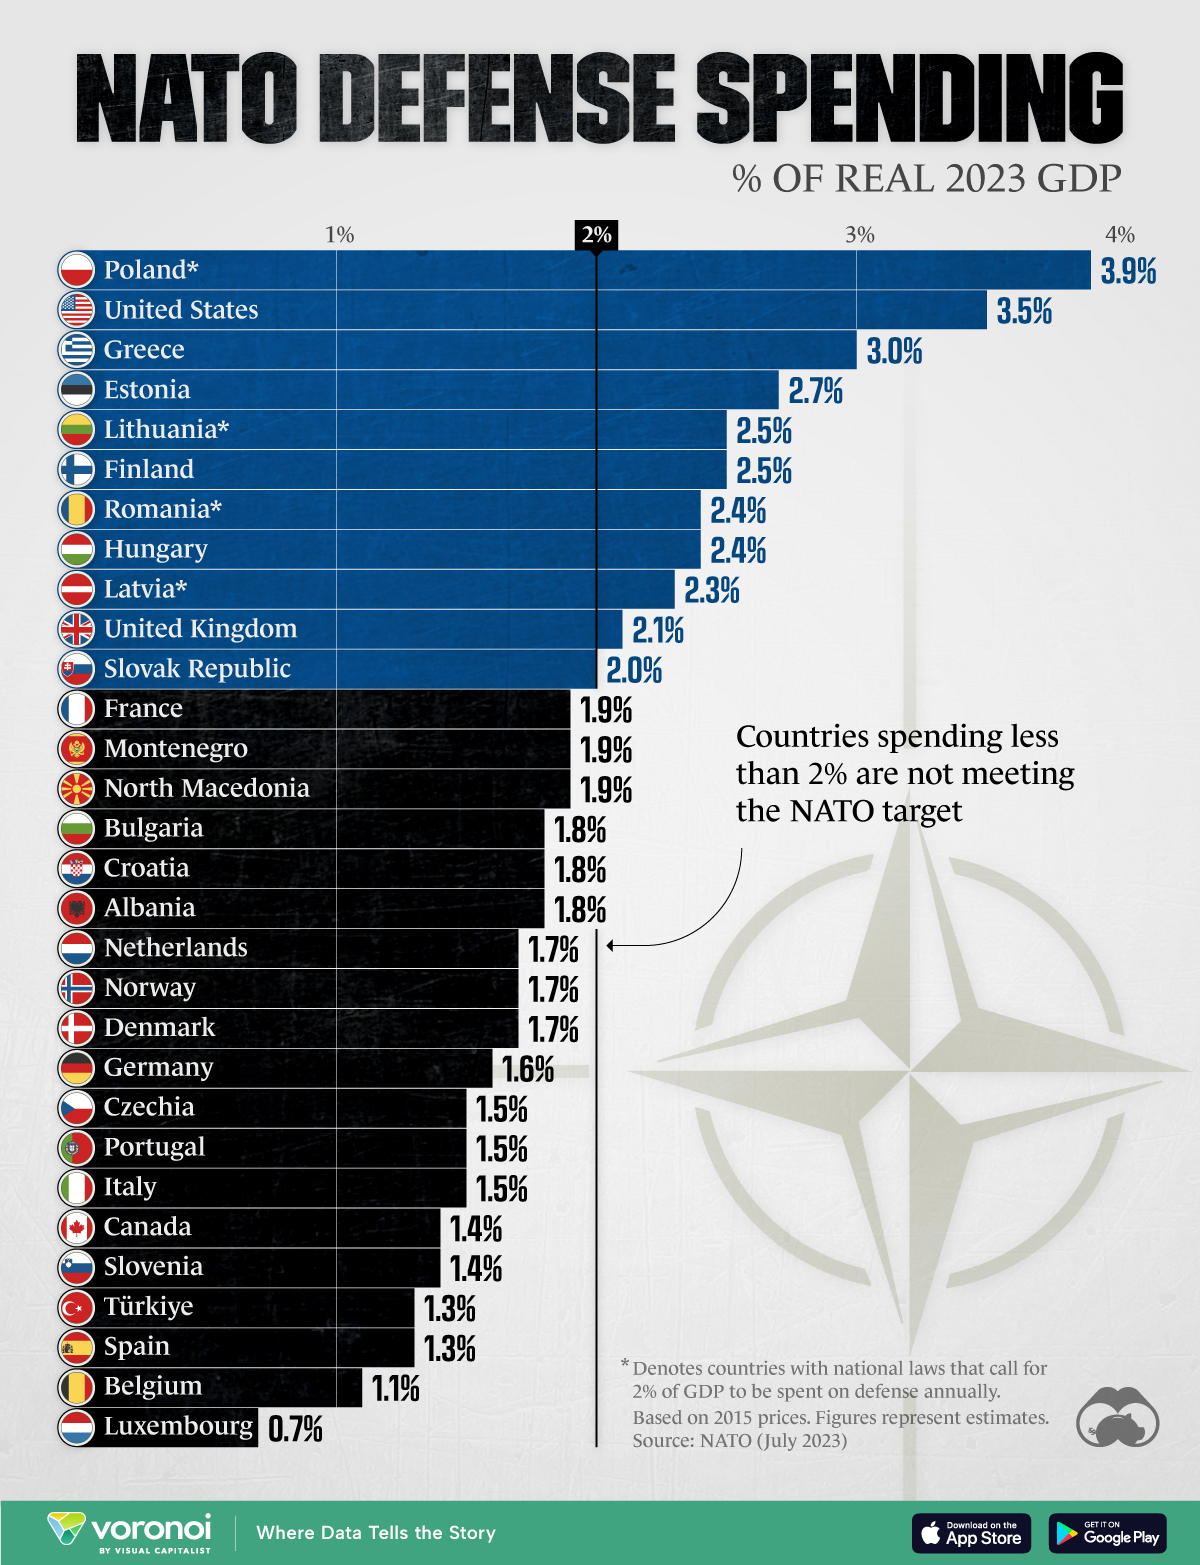 Bar chart showing Nato defense spending by country